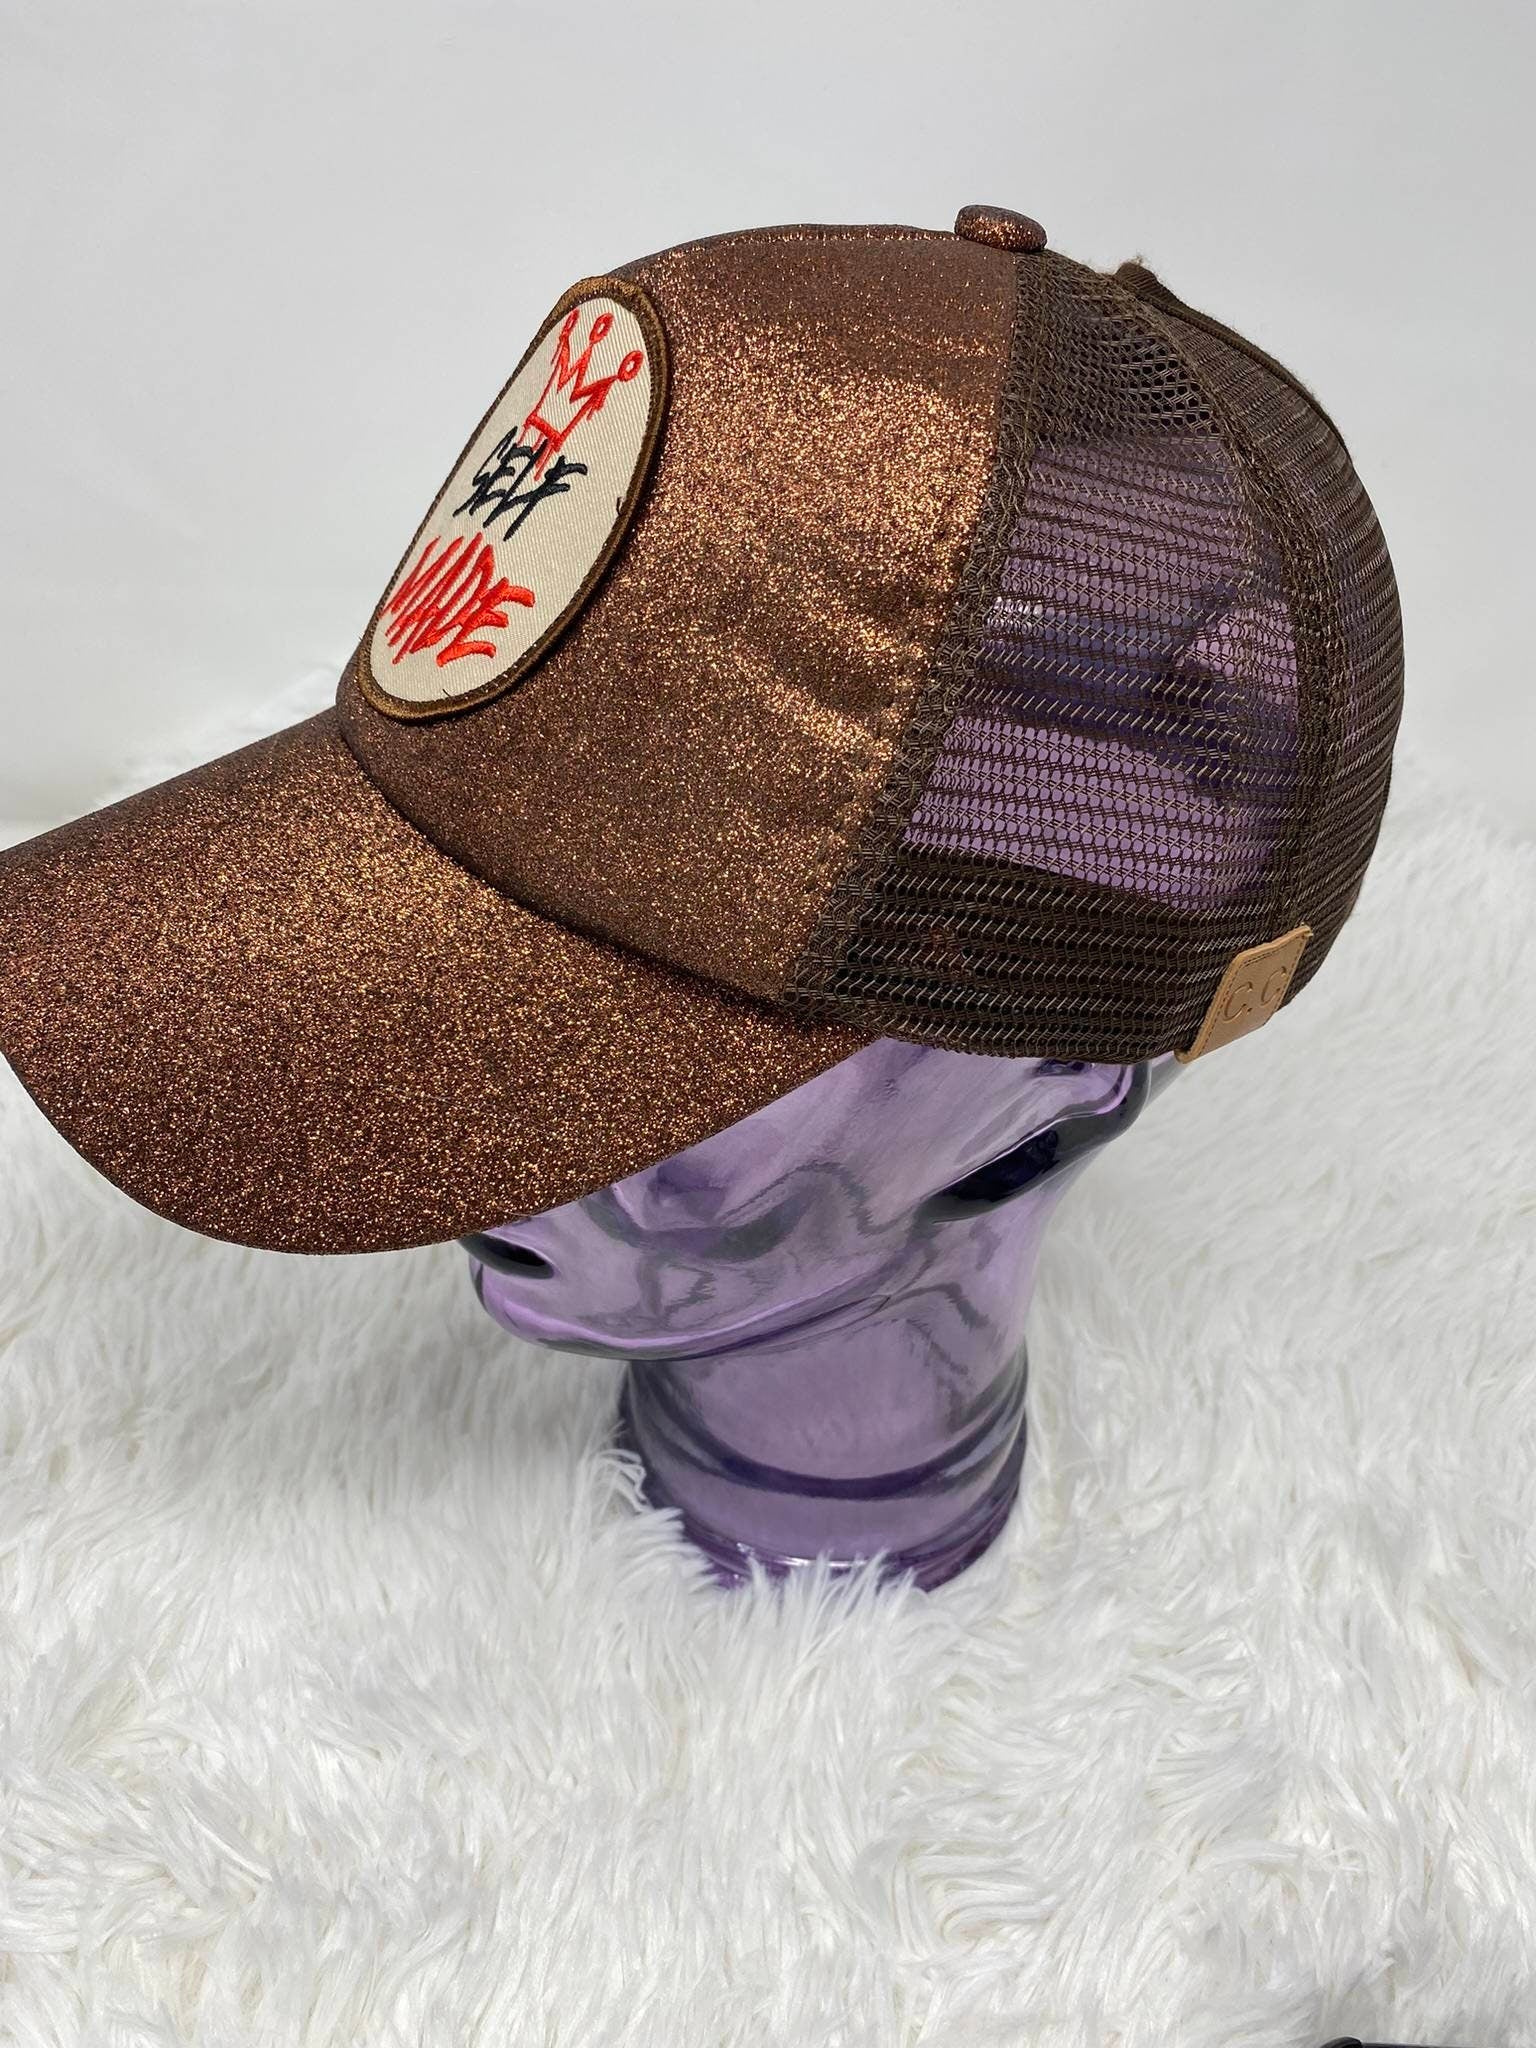 Brown Glitter Ponytail Hat, w/"Self-Made" Beige/Red/Black Patch, Sparkling Bad Hair Day Hat, Cute Hat for Sunblocking, & Summer Hairstyles